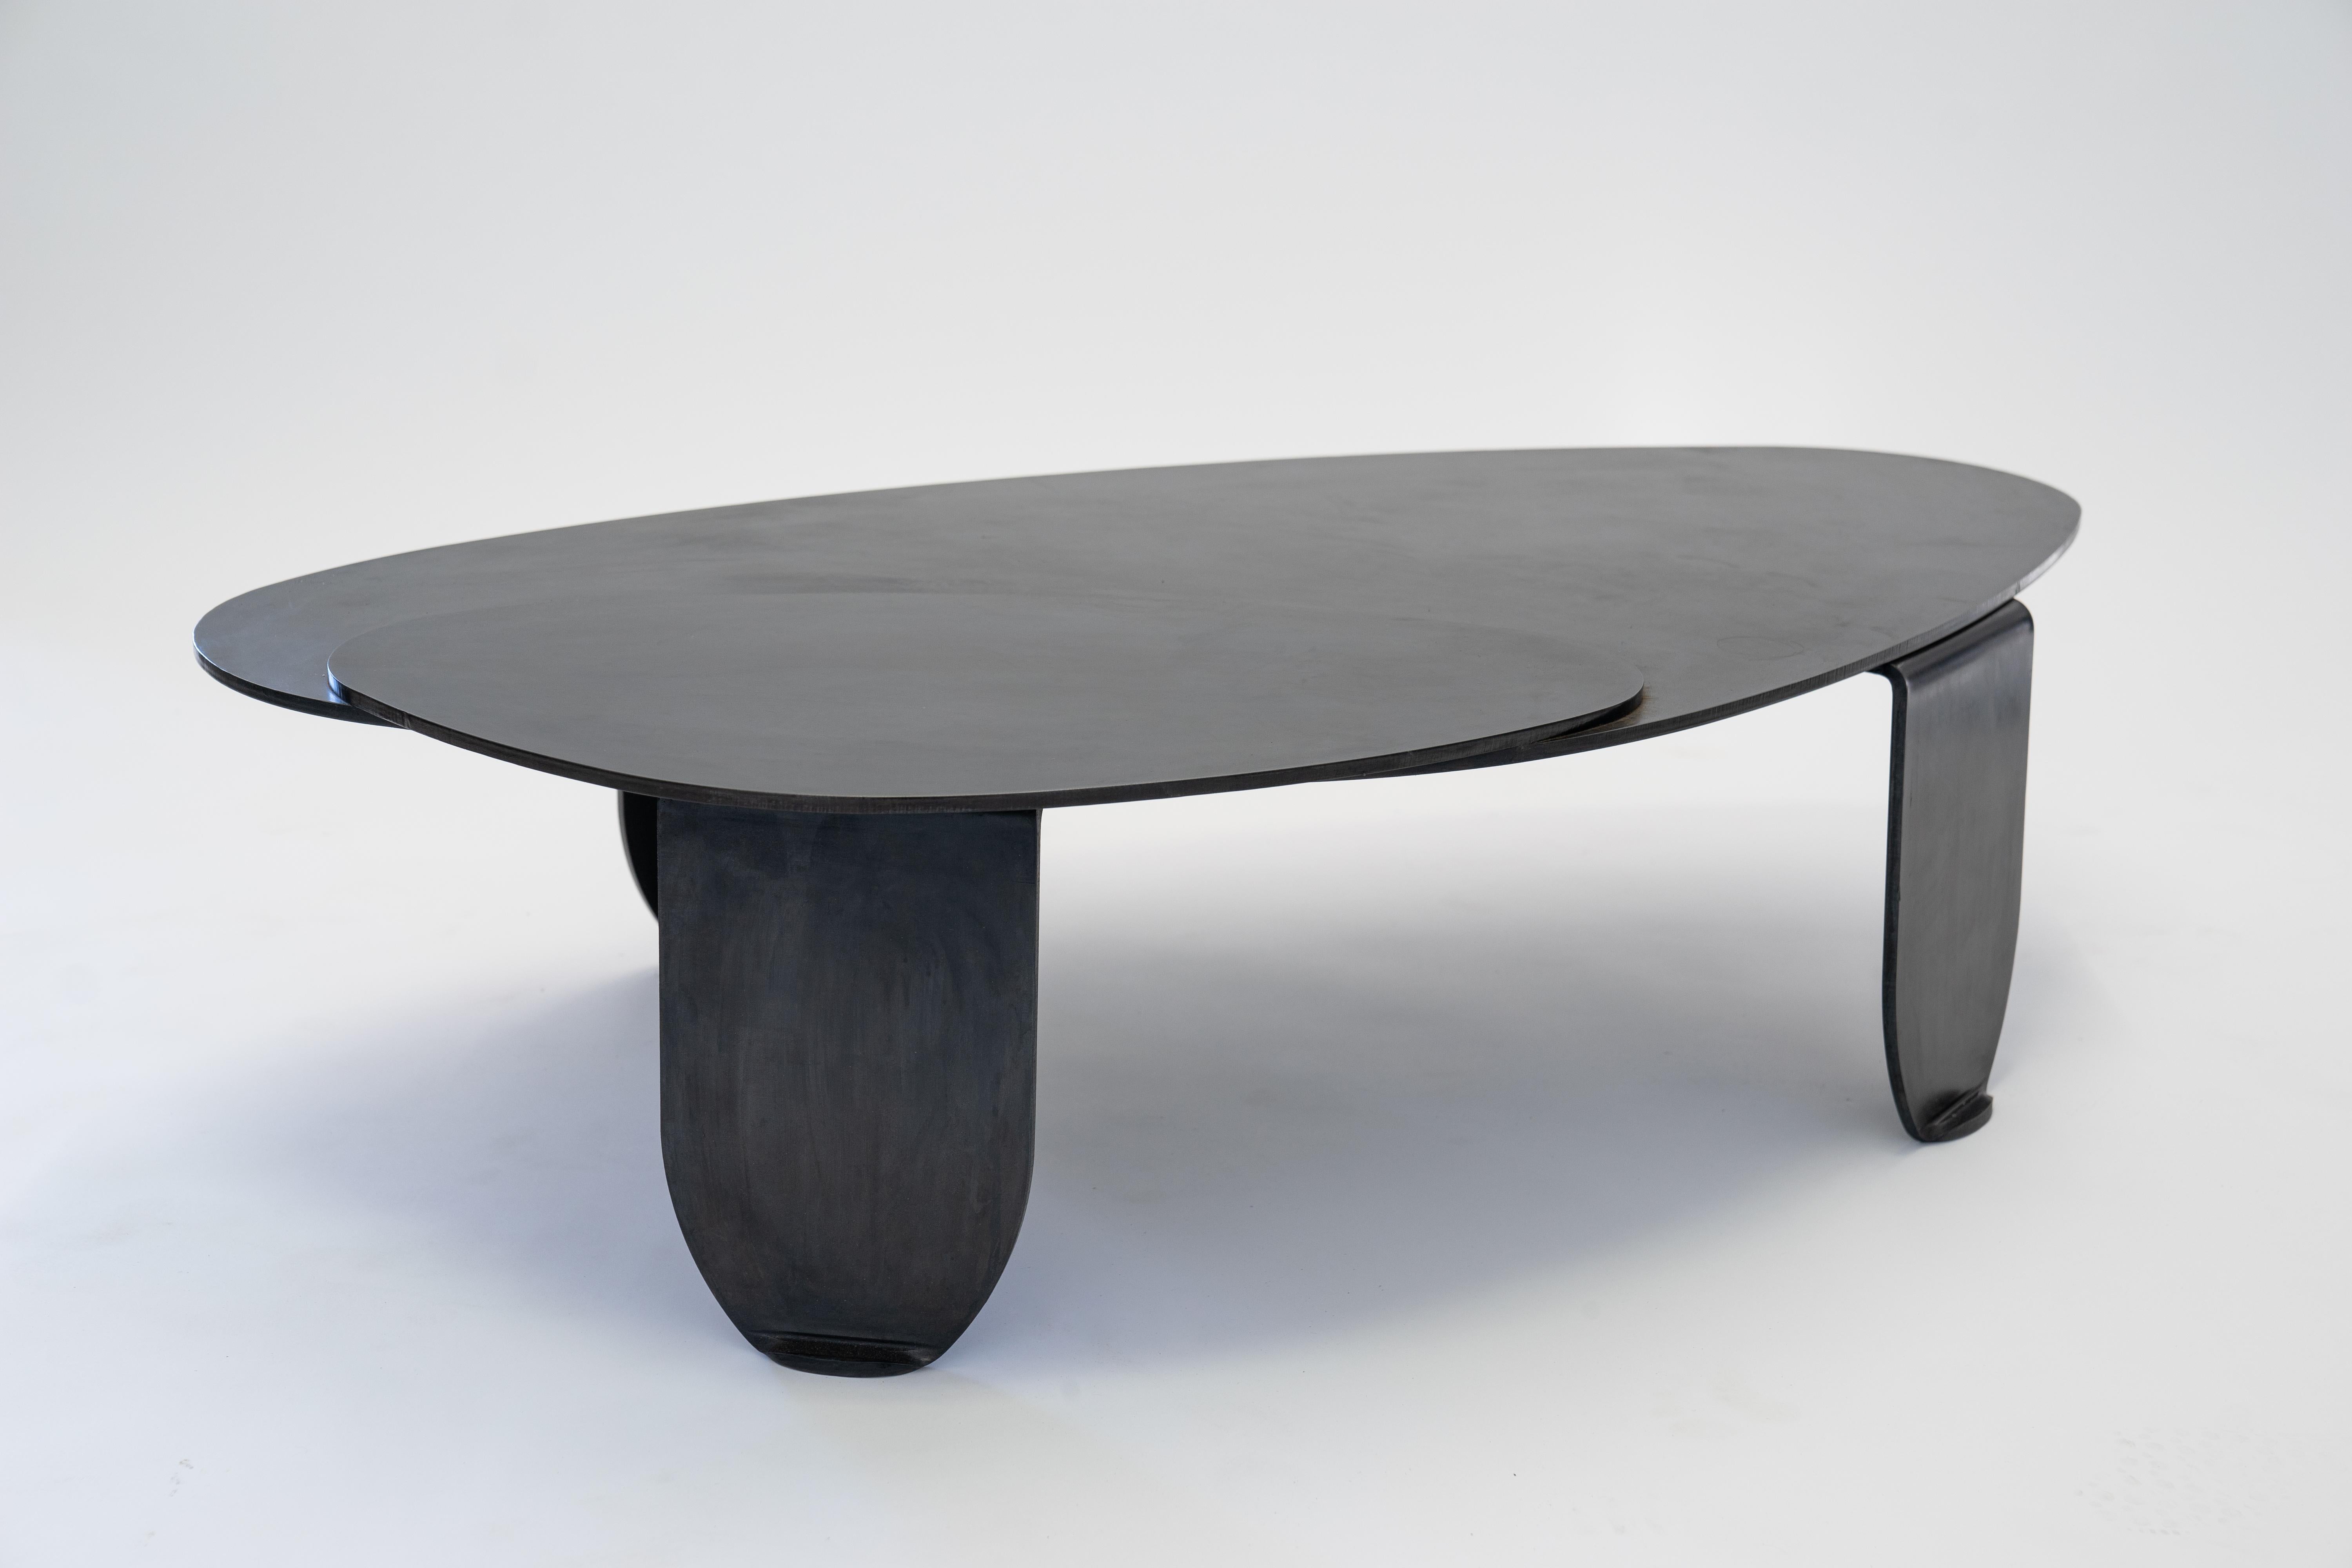 Circular/Organic Shape Coffee Table Black Modern/Contemporary Blackened Steel In New Condition For Sale In Bronx, NY